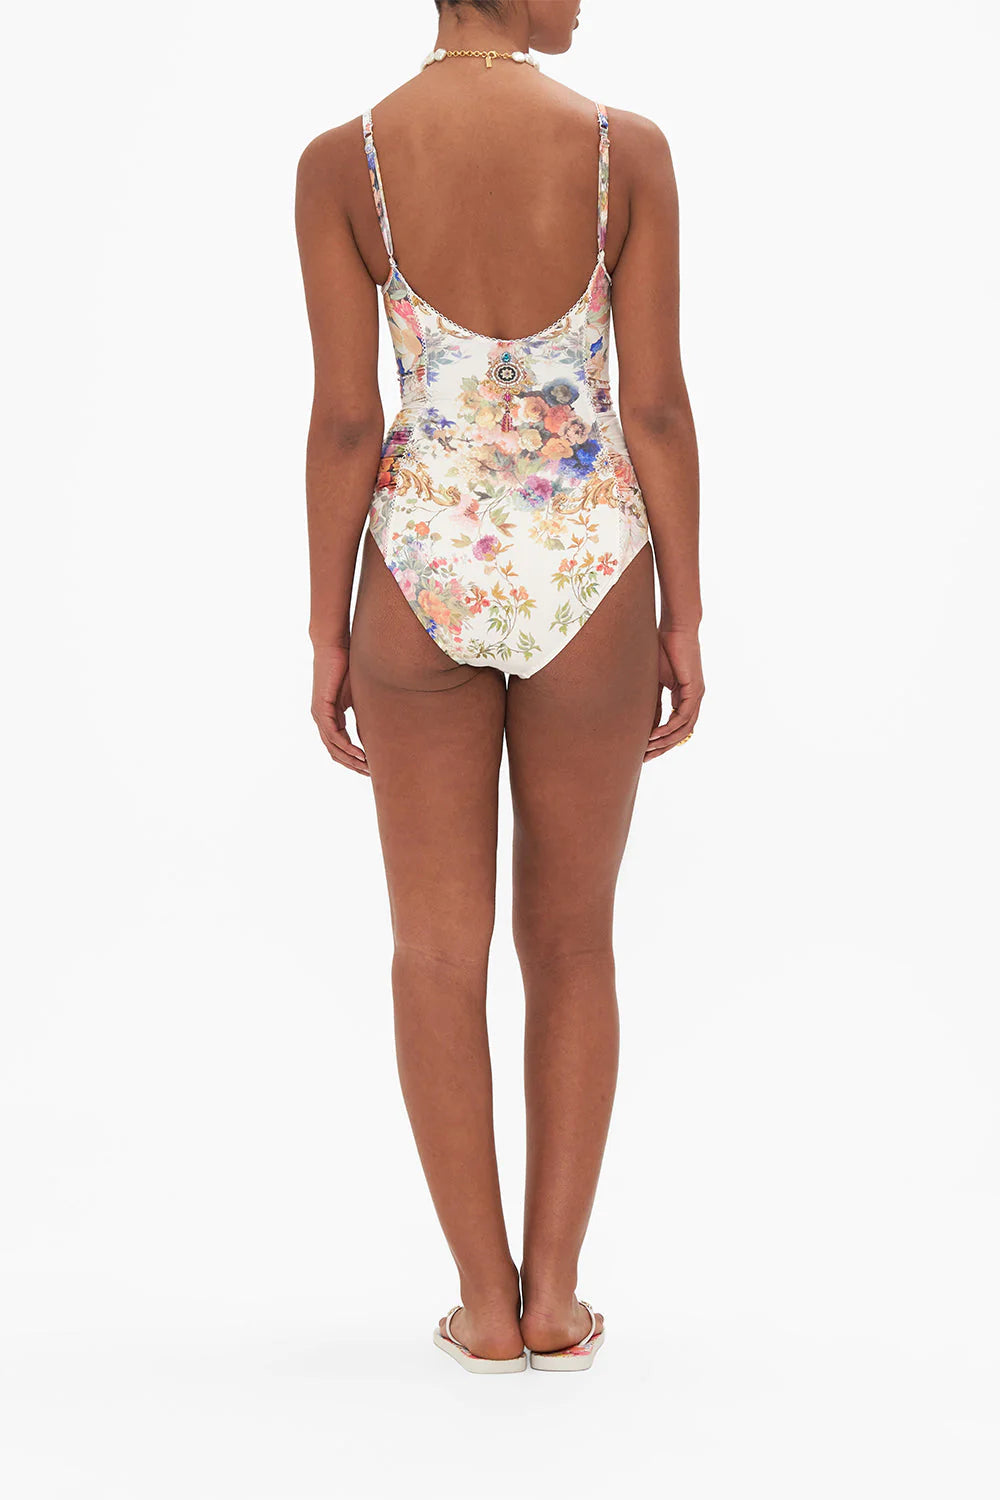 CAMILLA ROUCHED SIDE ONE PIECE - FRIENDS WITH FRESCOS - ESCAPE CLOTHING